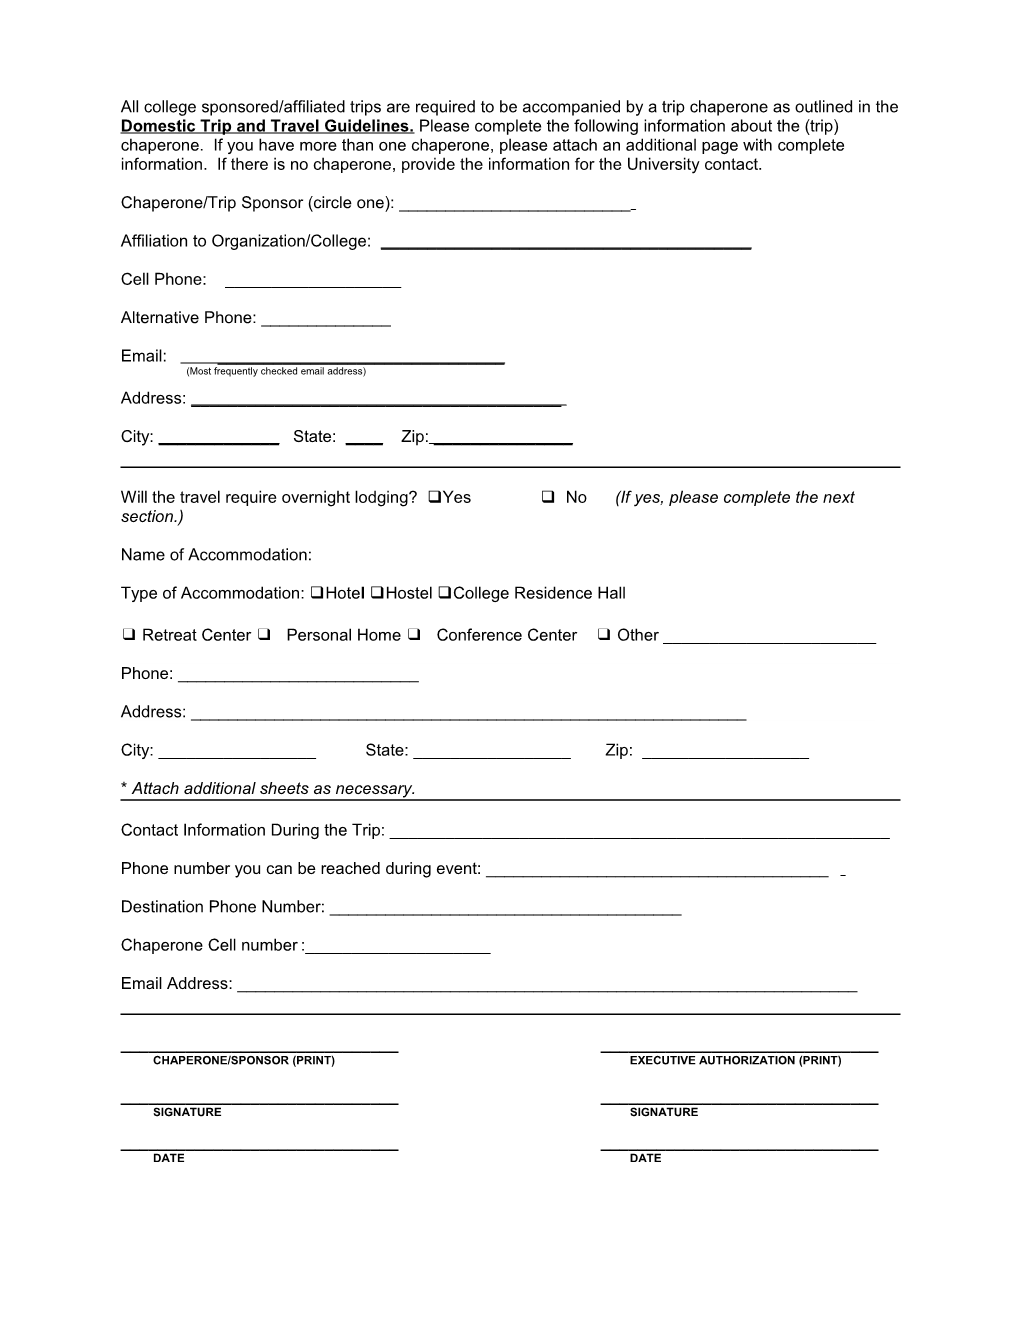 Travel Authorization Form for Off-Campus Student Travel